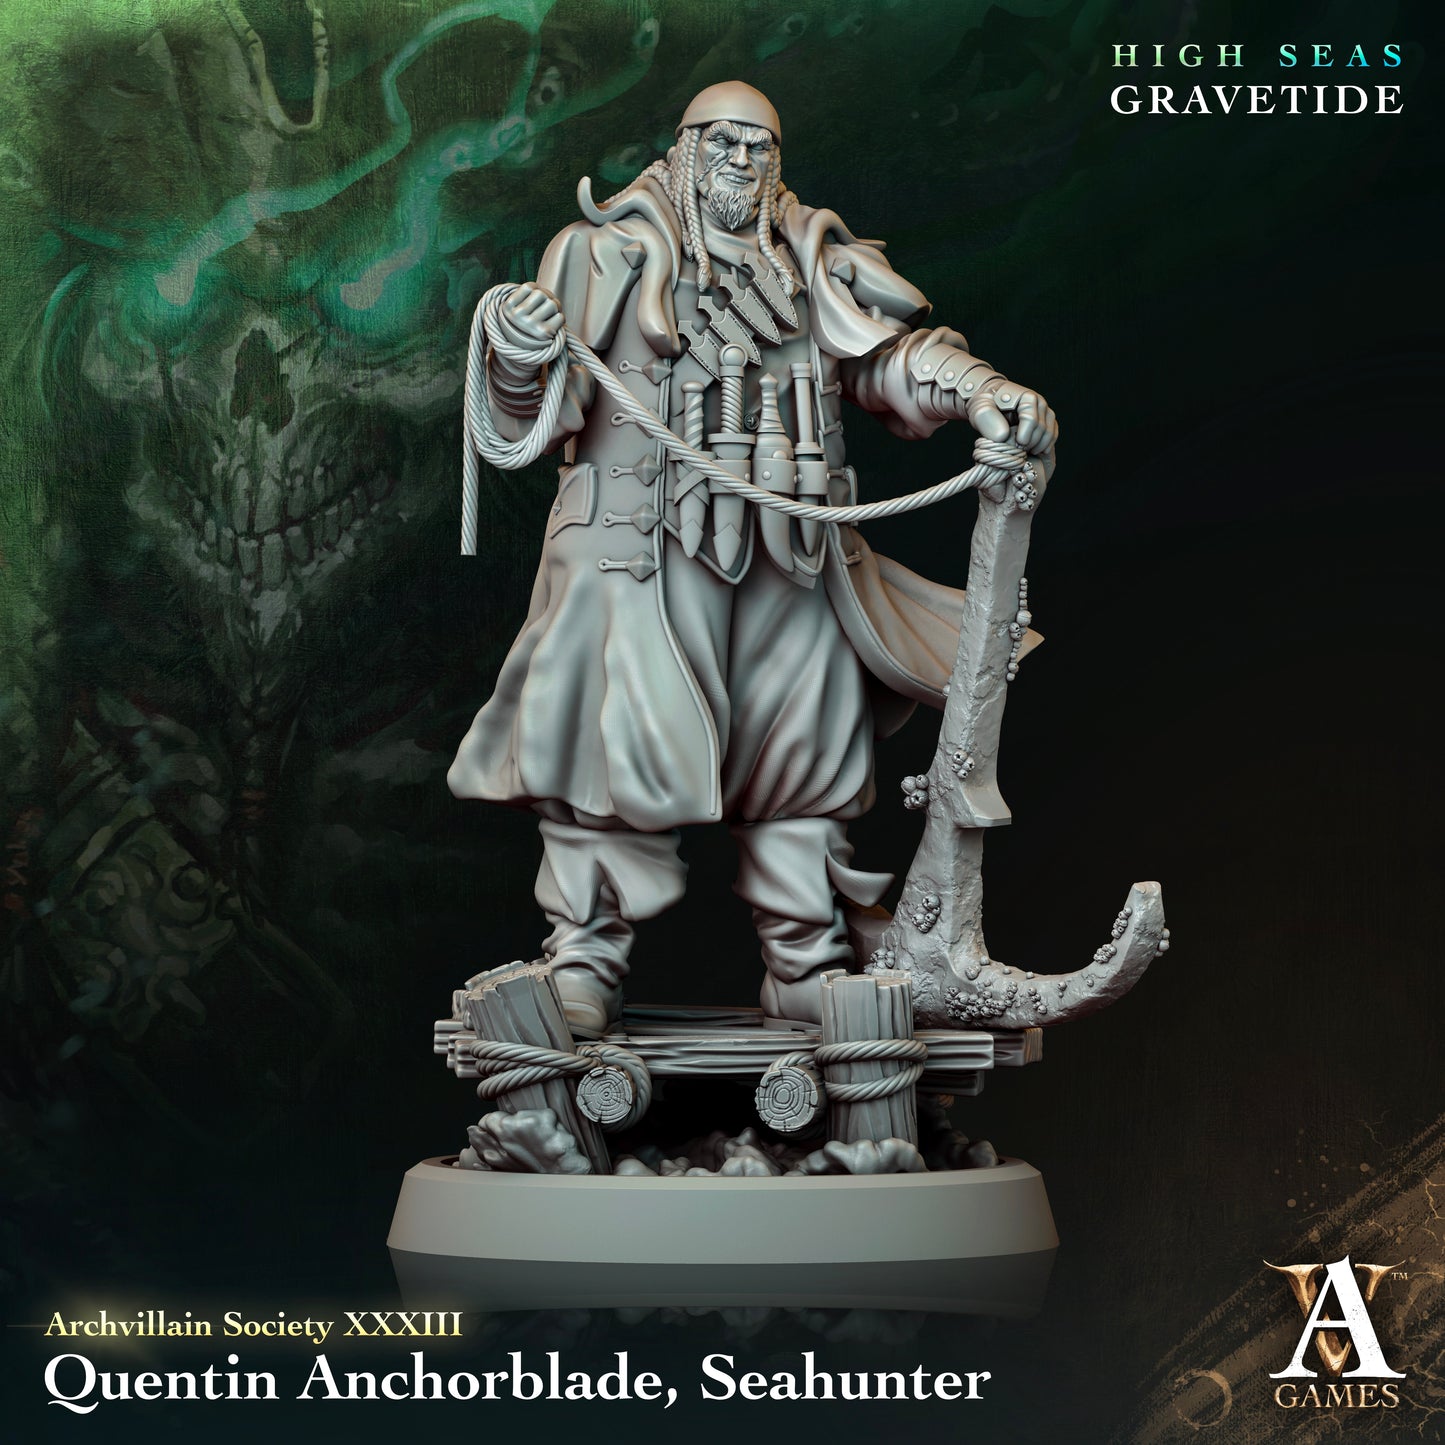 Quentin Anchorblade - Seahunter